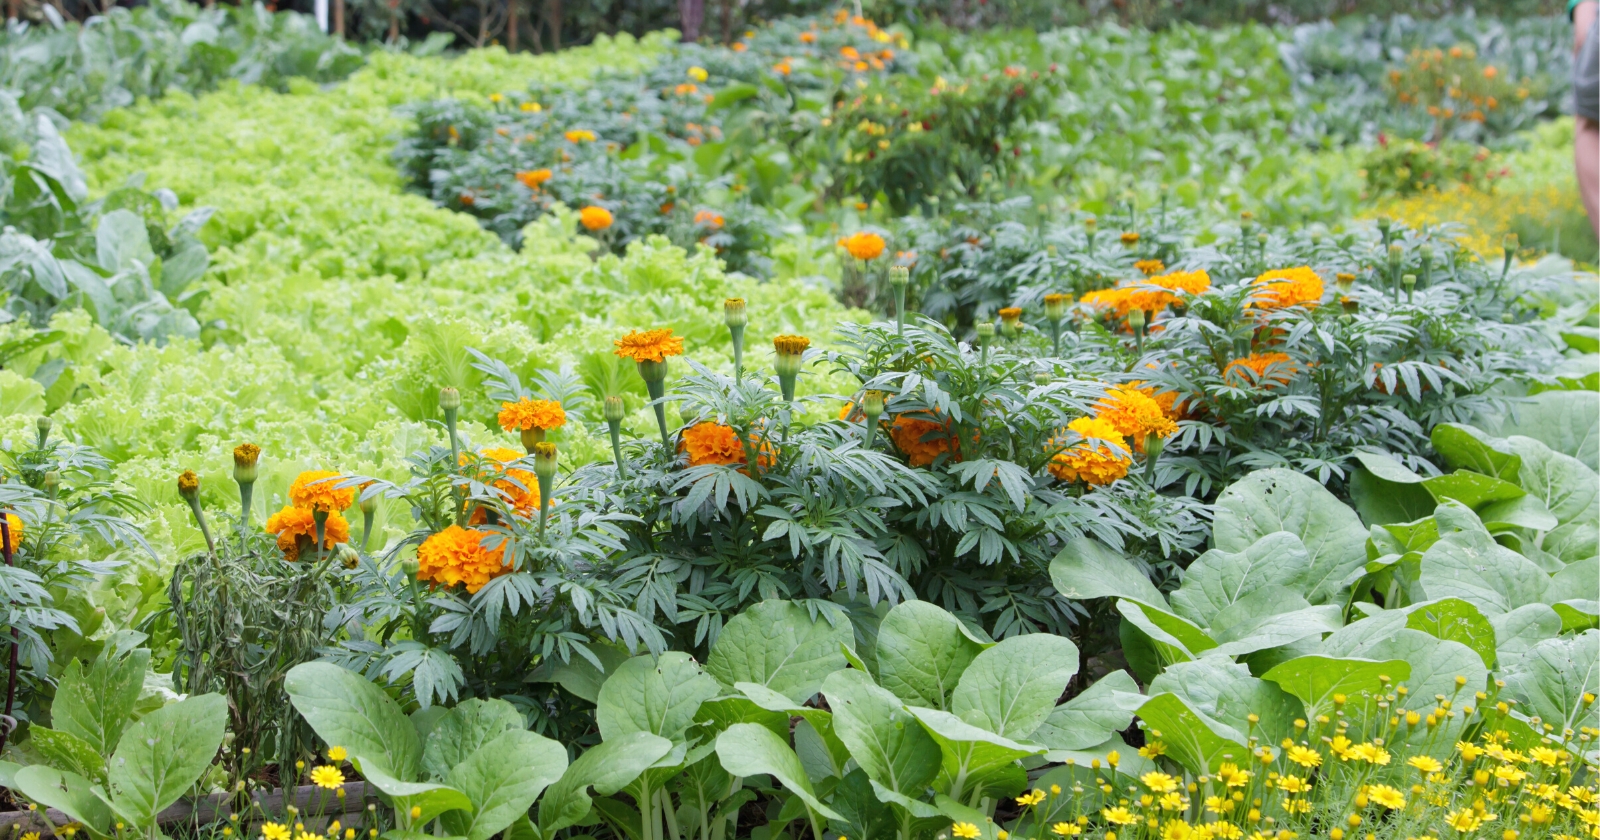 Planting Marigolds With Vegetables